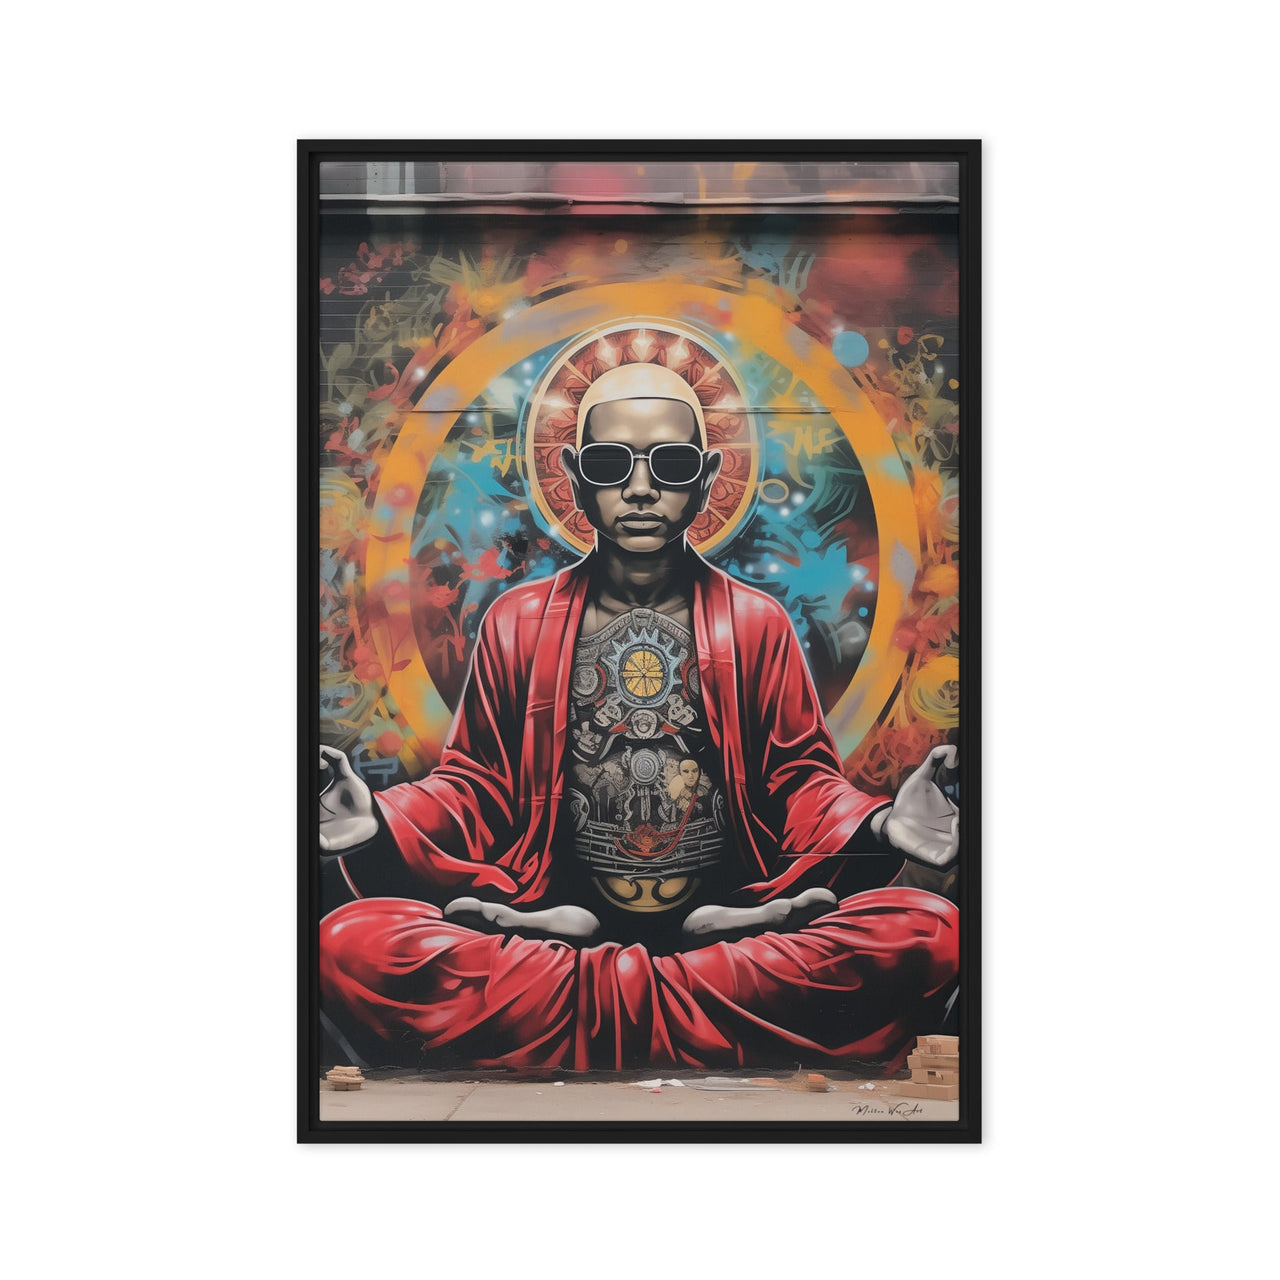 Framed canvas print from Milton Wes Art, depicting a serene, meditative figure in red, with intricate spiritual motifs, set against an energetic, abstract halo, enhancing the contemplative atmosphere of the room